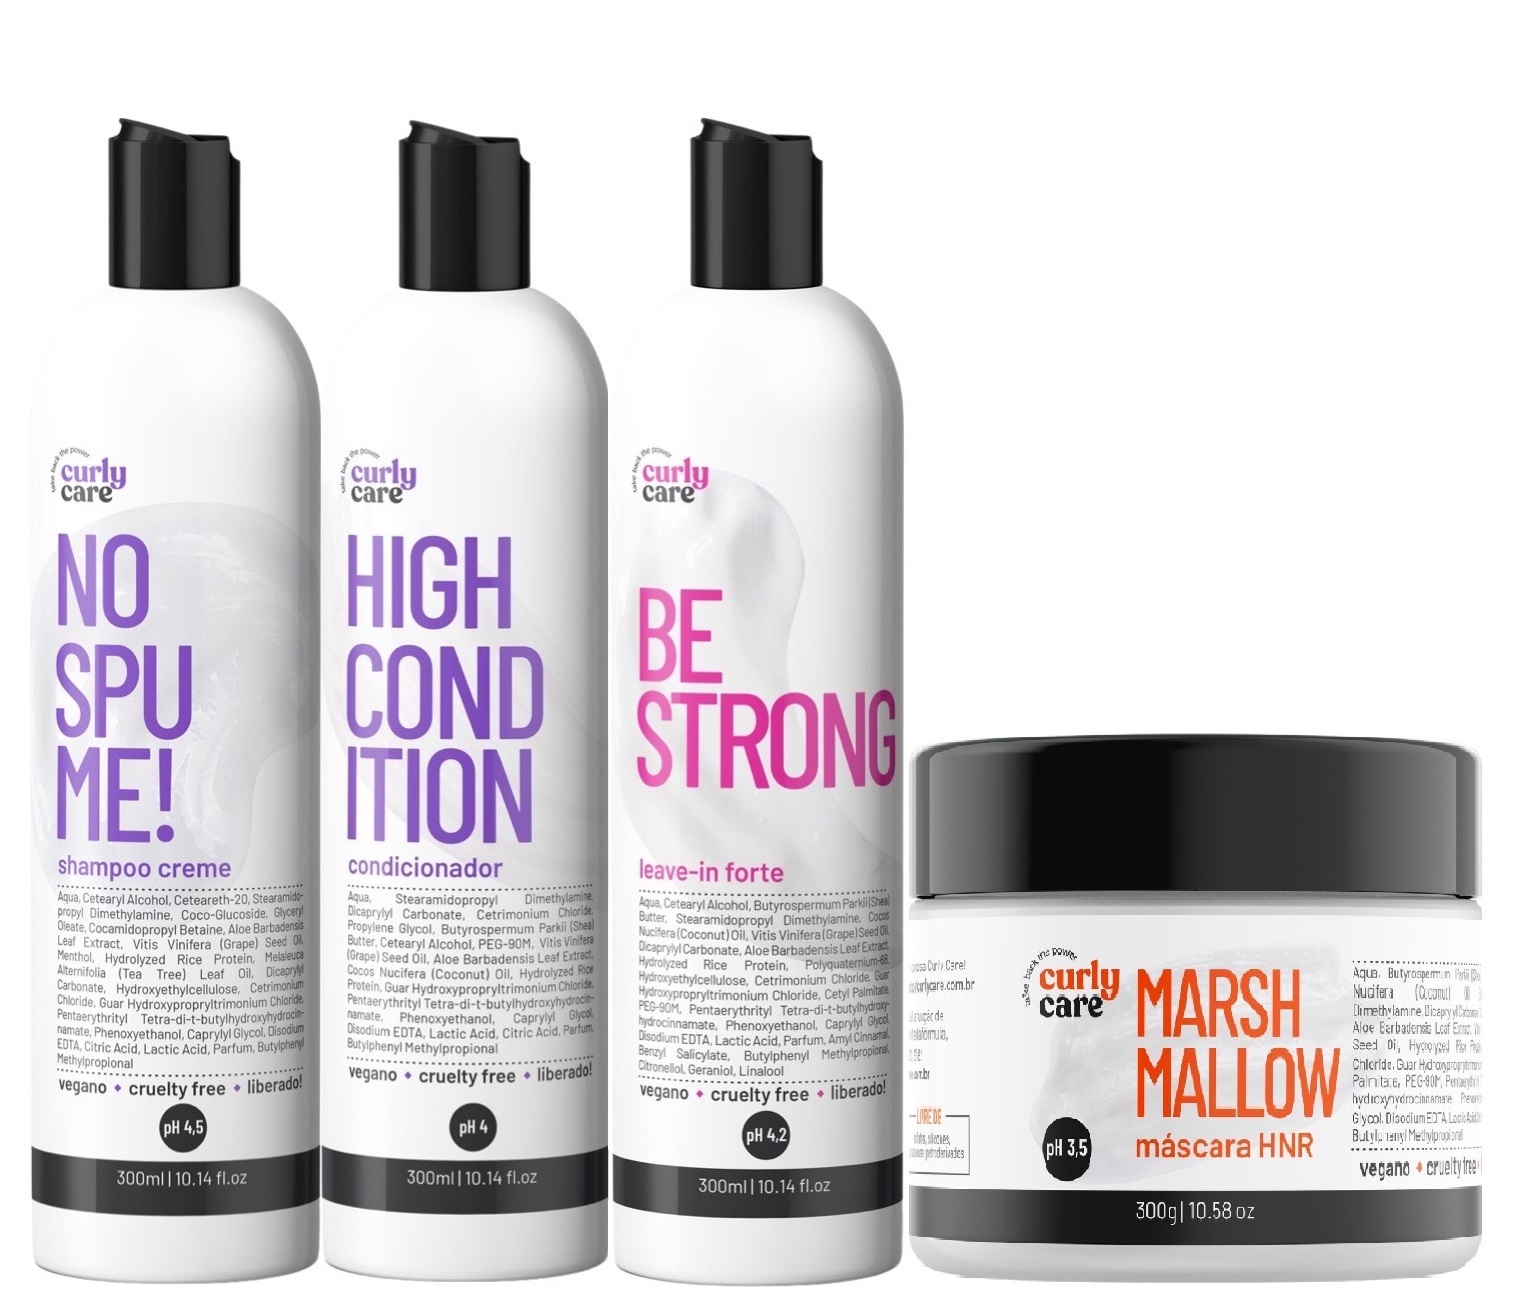 Kit Curly Care No Spume 2x300ml + Máscara Marshmallow e Be Strong